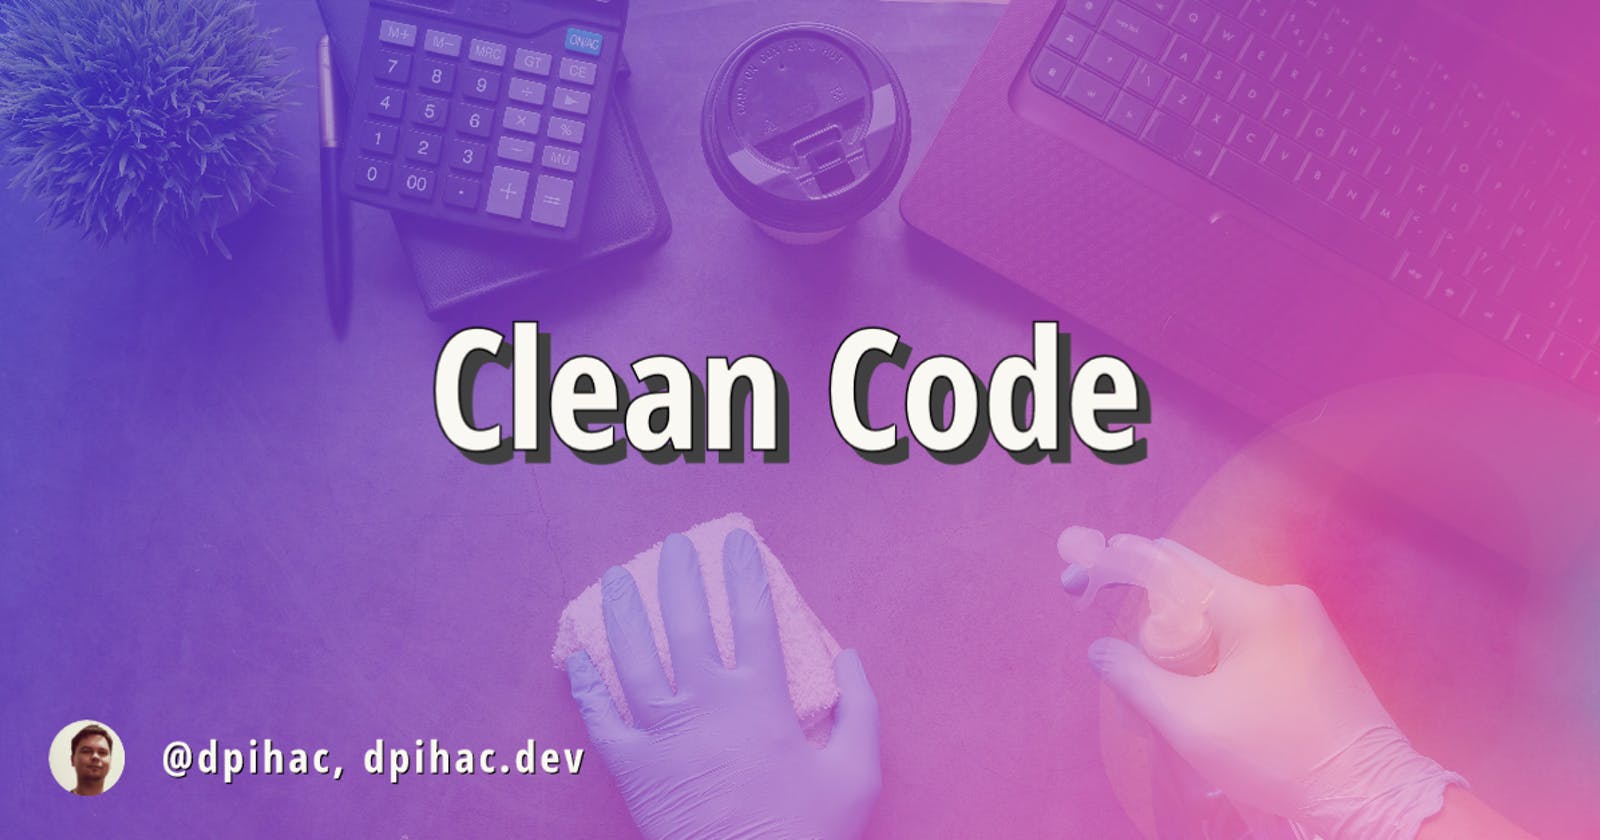 Clean Code: Tips for Writing Code that is Easy to Read, Understand, and Maintain